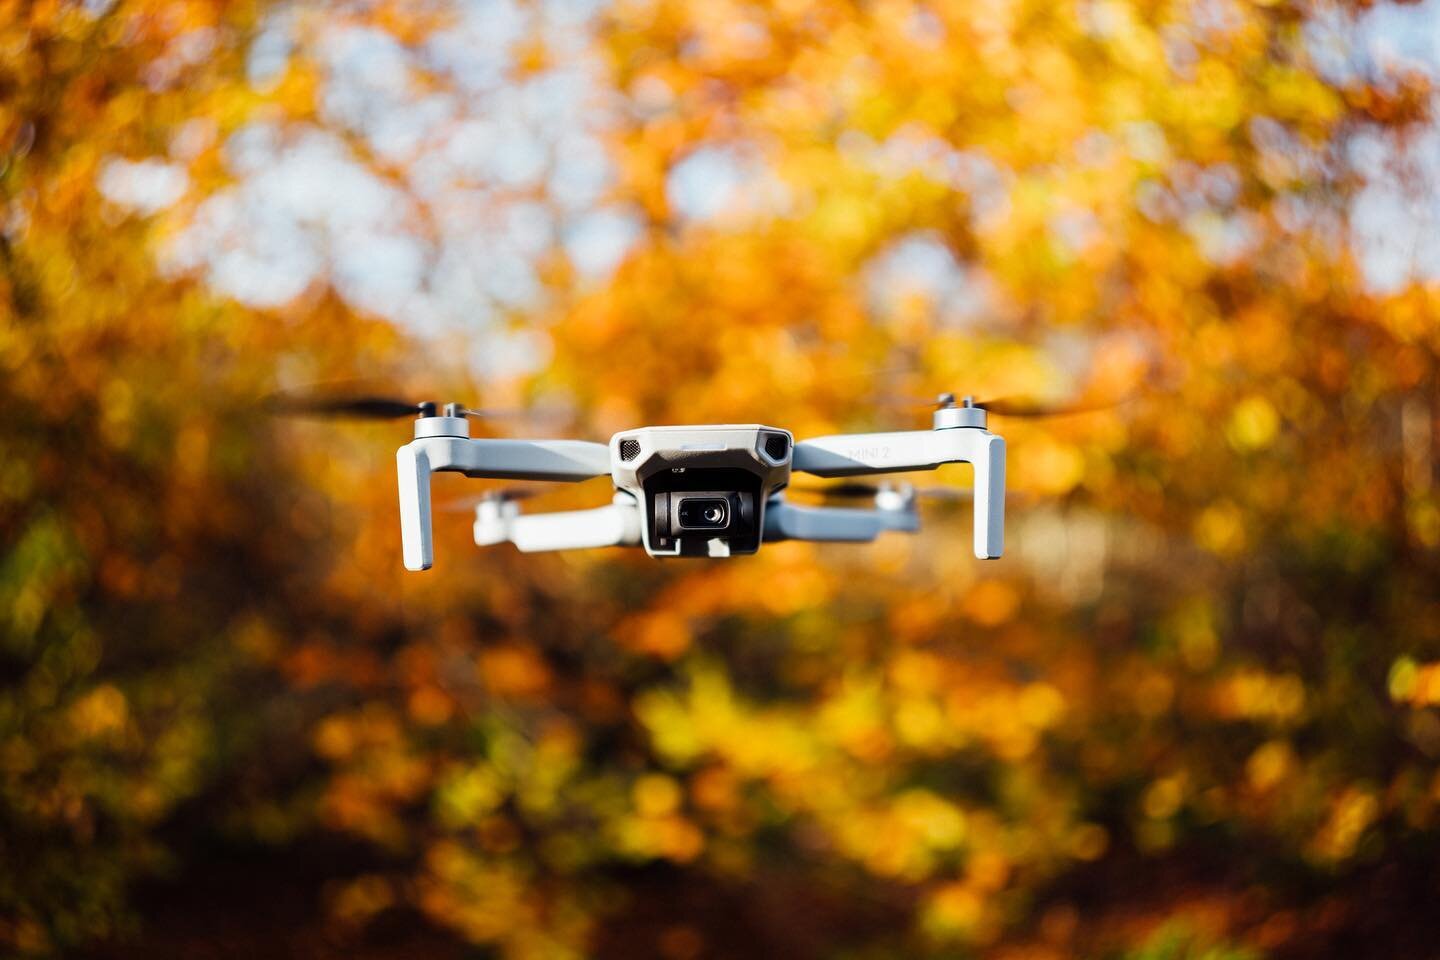 Say hello to our new drone! 👋🏼

When the UK drone laws changed at the start of the year to allow sub 250g drones to fly with minimal restriction, I knew the DJI Mini 2 could be an excellent gateway to offering more aerial content.

The plan is to l